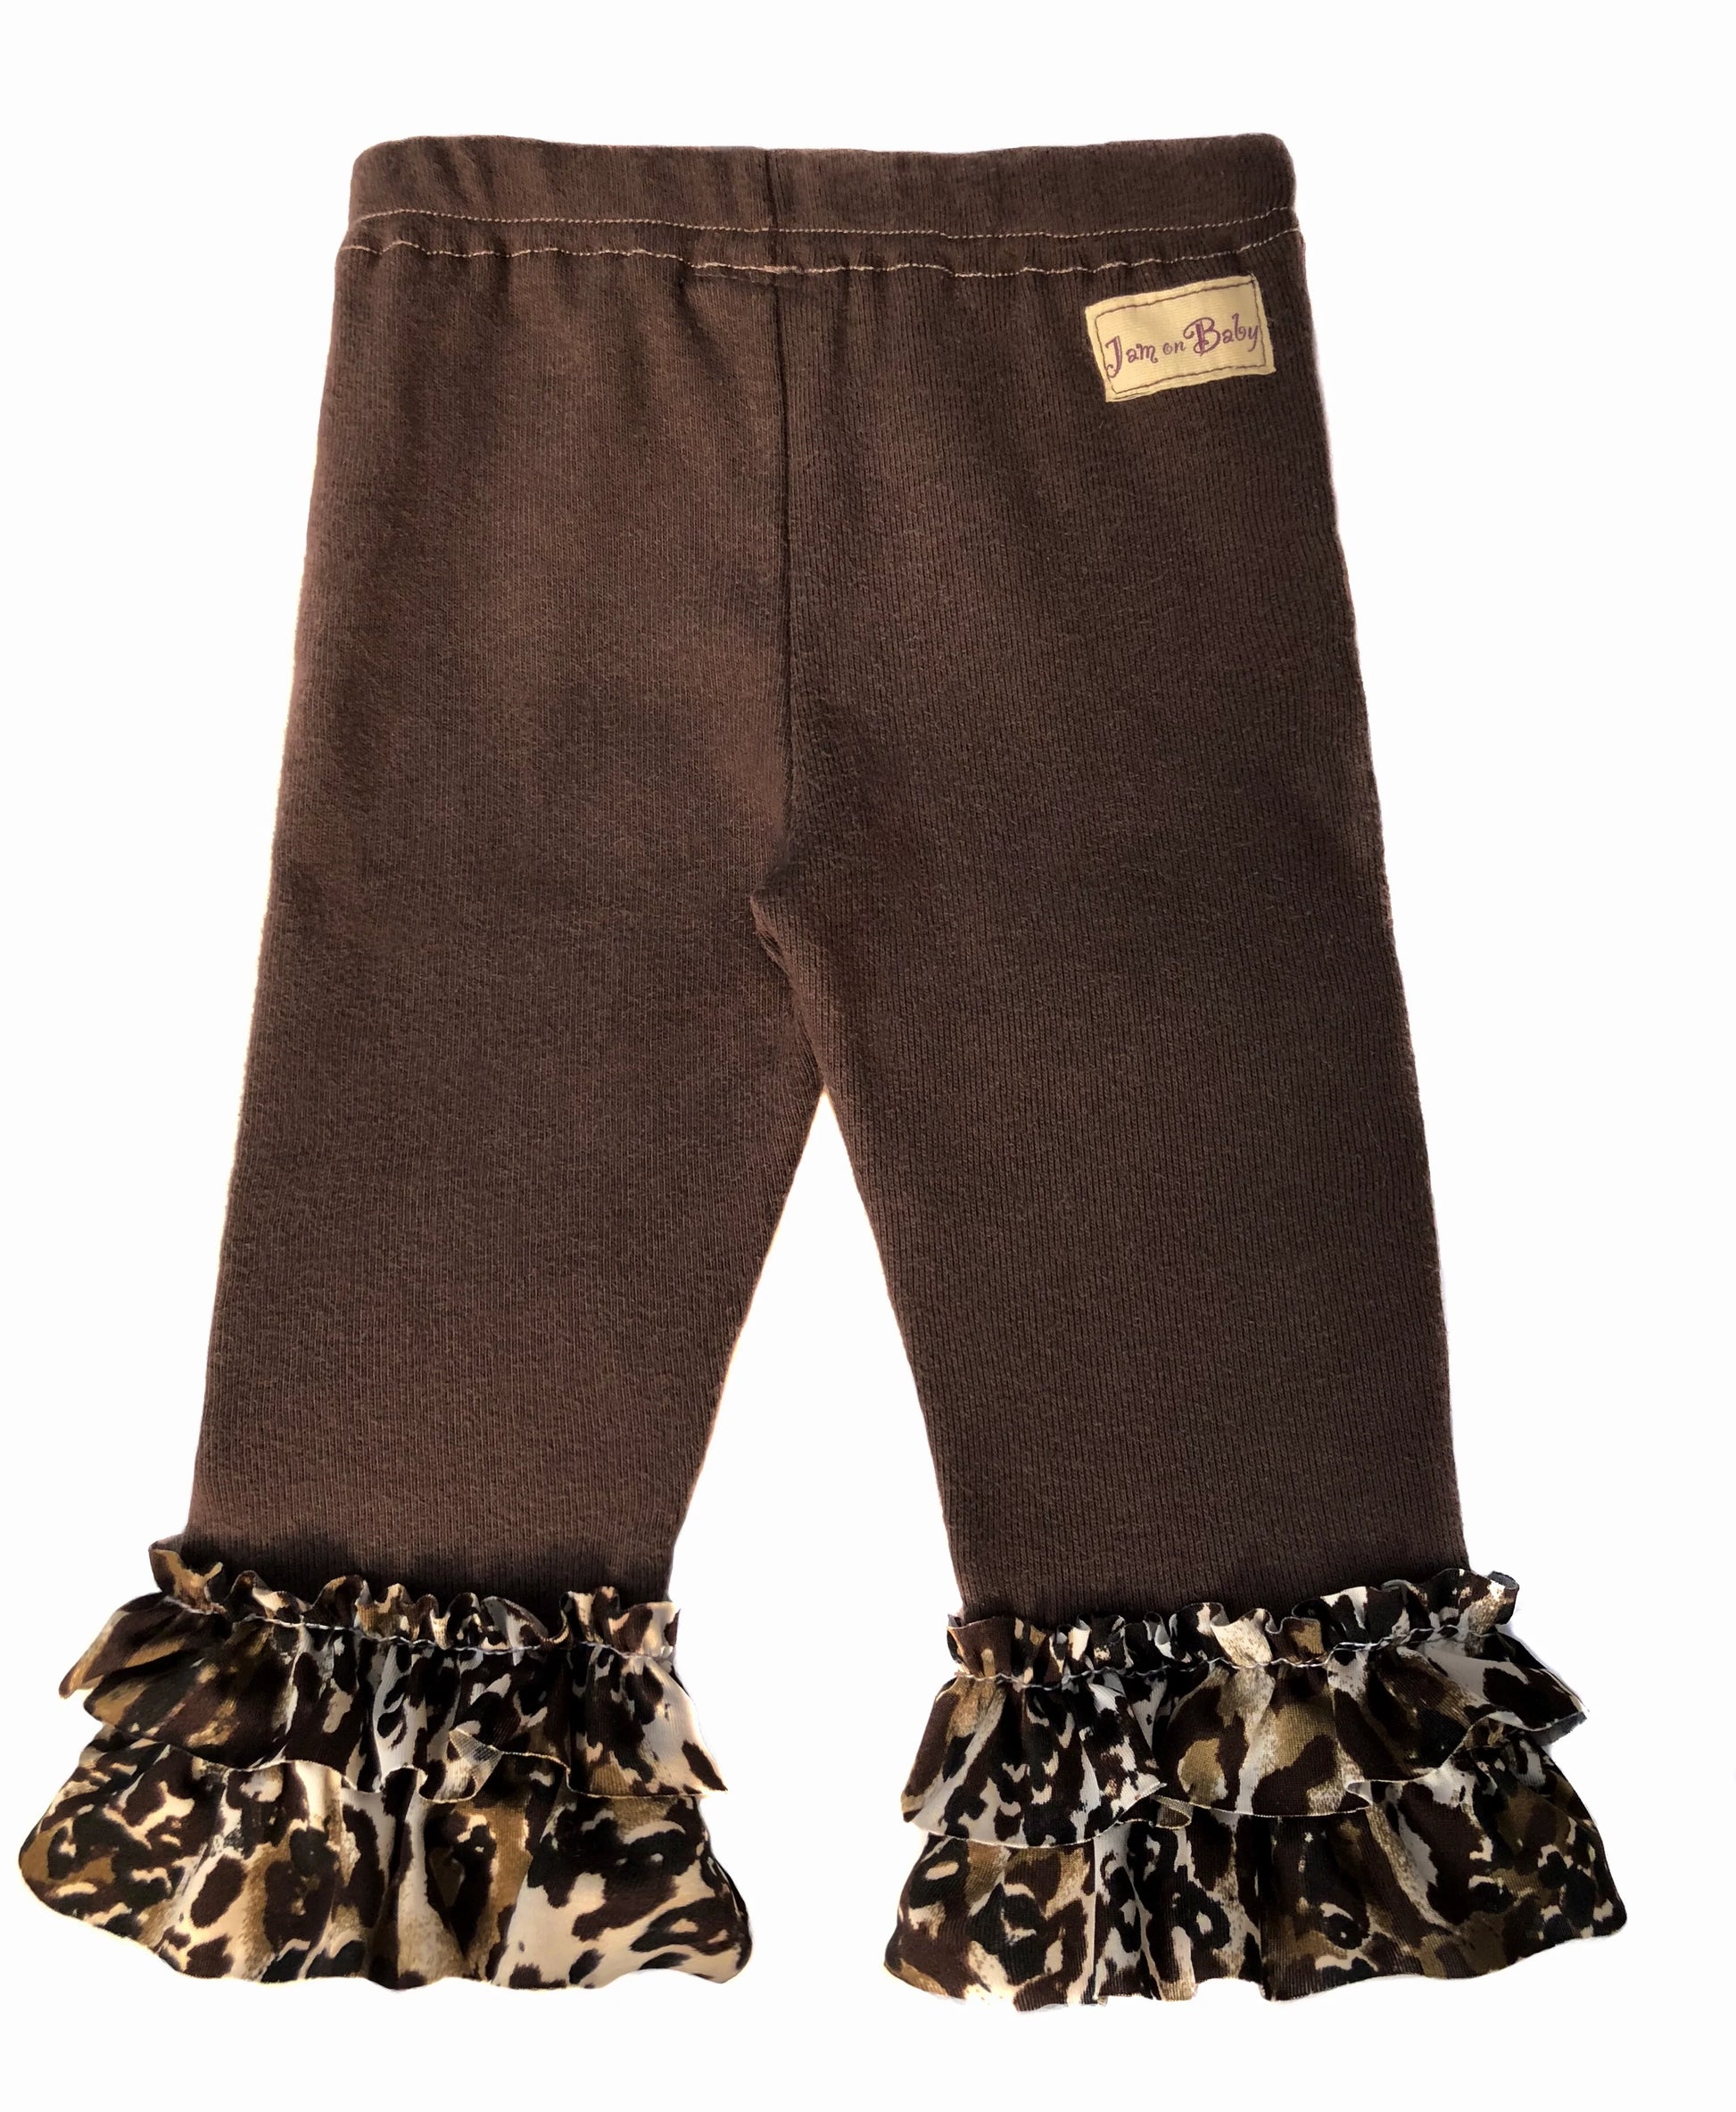 Most popular... our soft, sustainable combed cotton, rib knit legging with fully lined padded knee design. Leopard print ruffle trim in Lycra.  Pair with reversible leopard cuddle vest to complete the look.